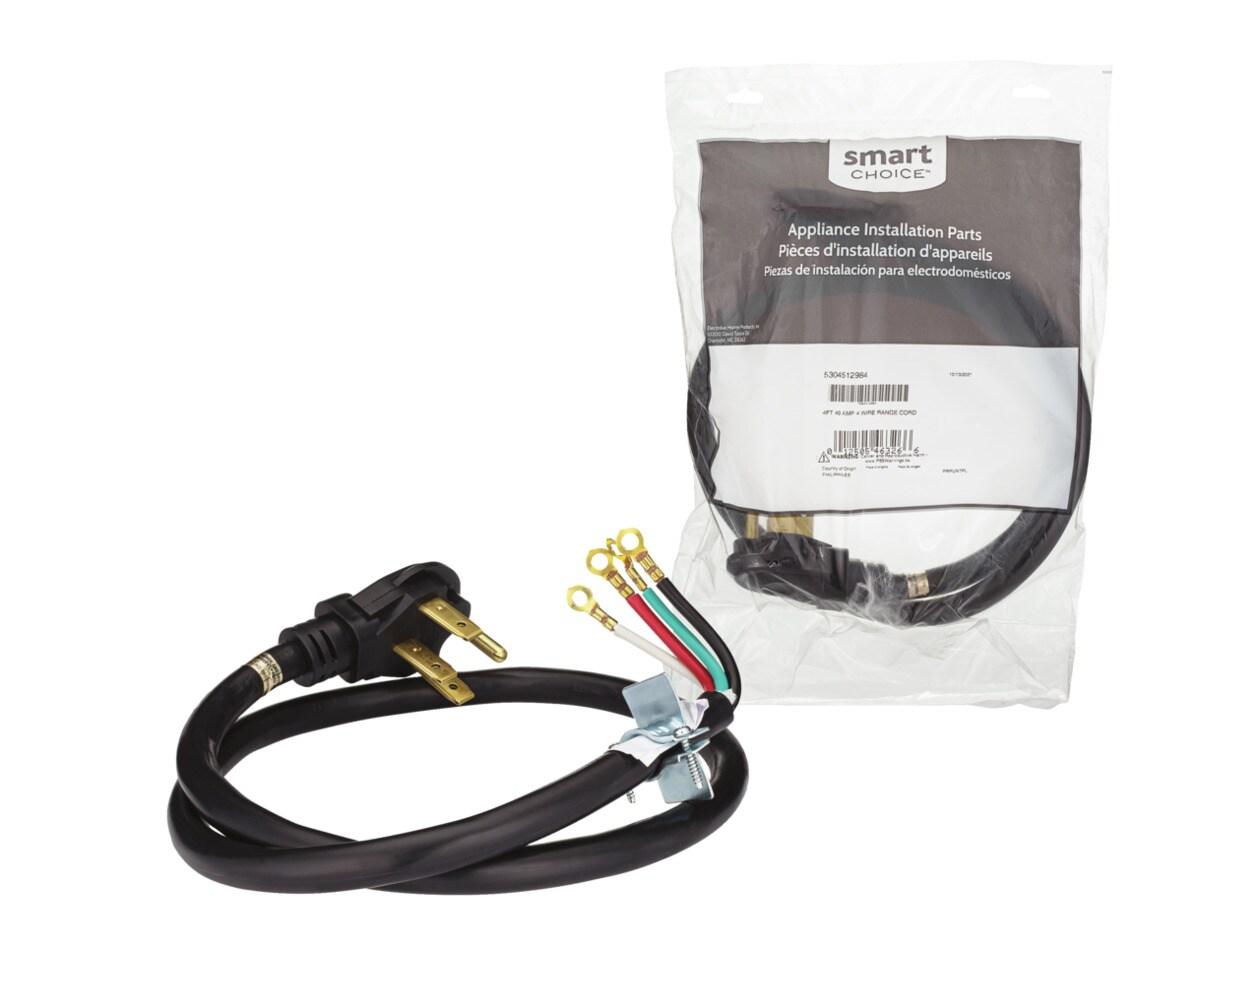 Frigidaire Smart Choice 4 ft. 40 Amp Range Cord with 4 Wire